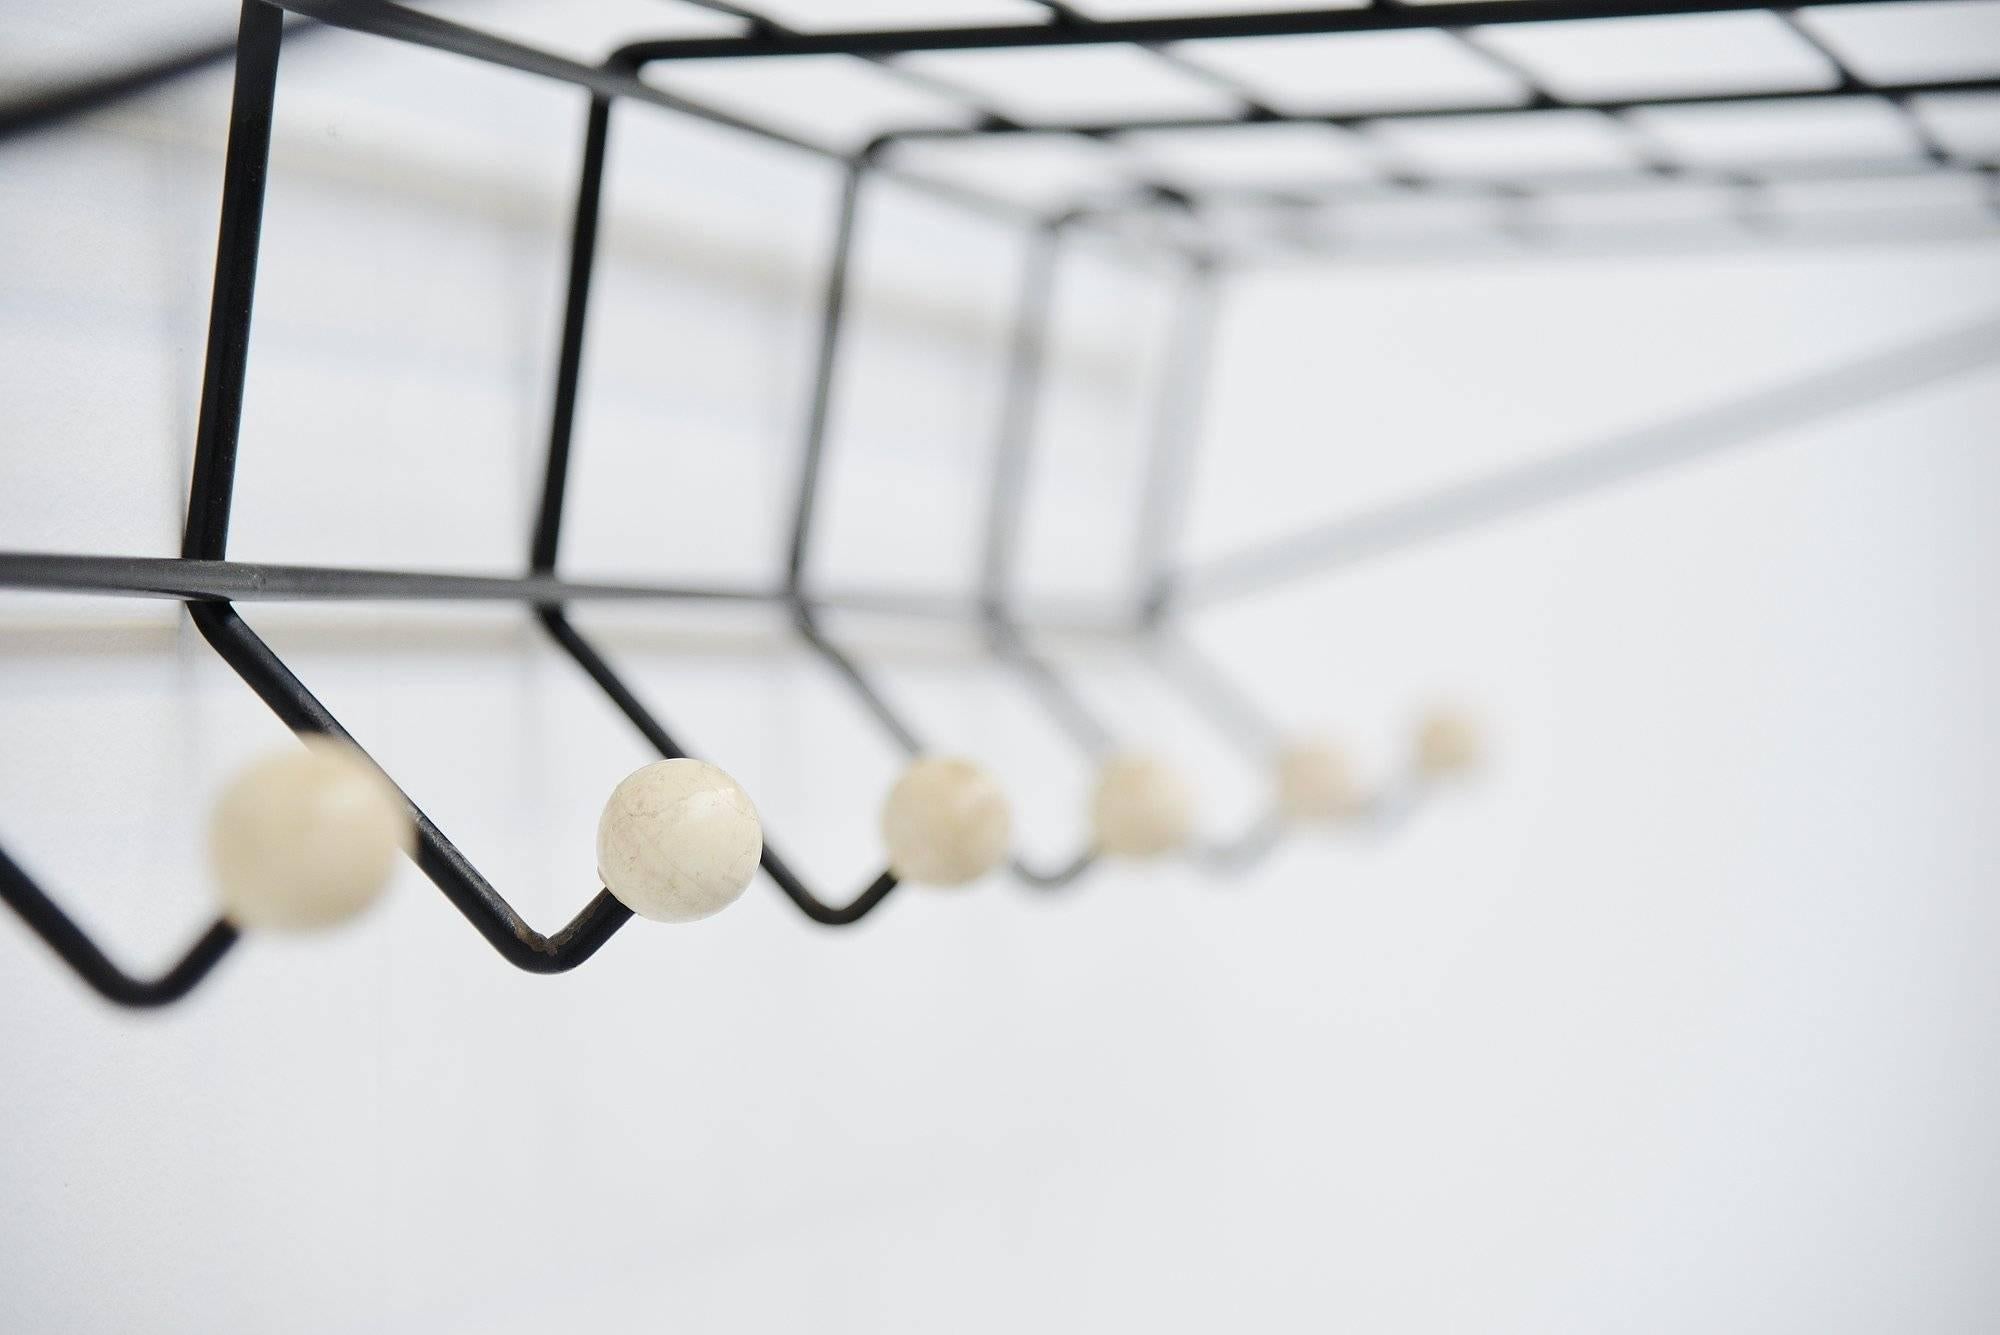 Very nice Industrial coat rack model DZ05 designed by Friso Kramer and manufactured by 't Spectrum, Holland, 1956. This is the largest version made and has a black painted metal wire frame with white painted wooden coat knobs. The coat rack is in